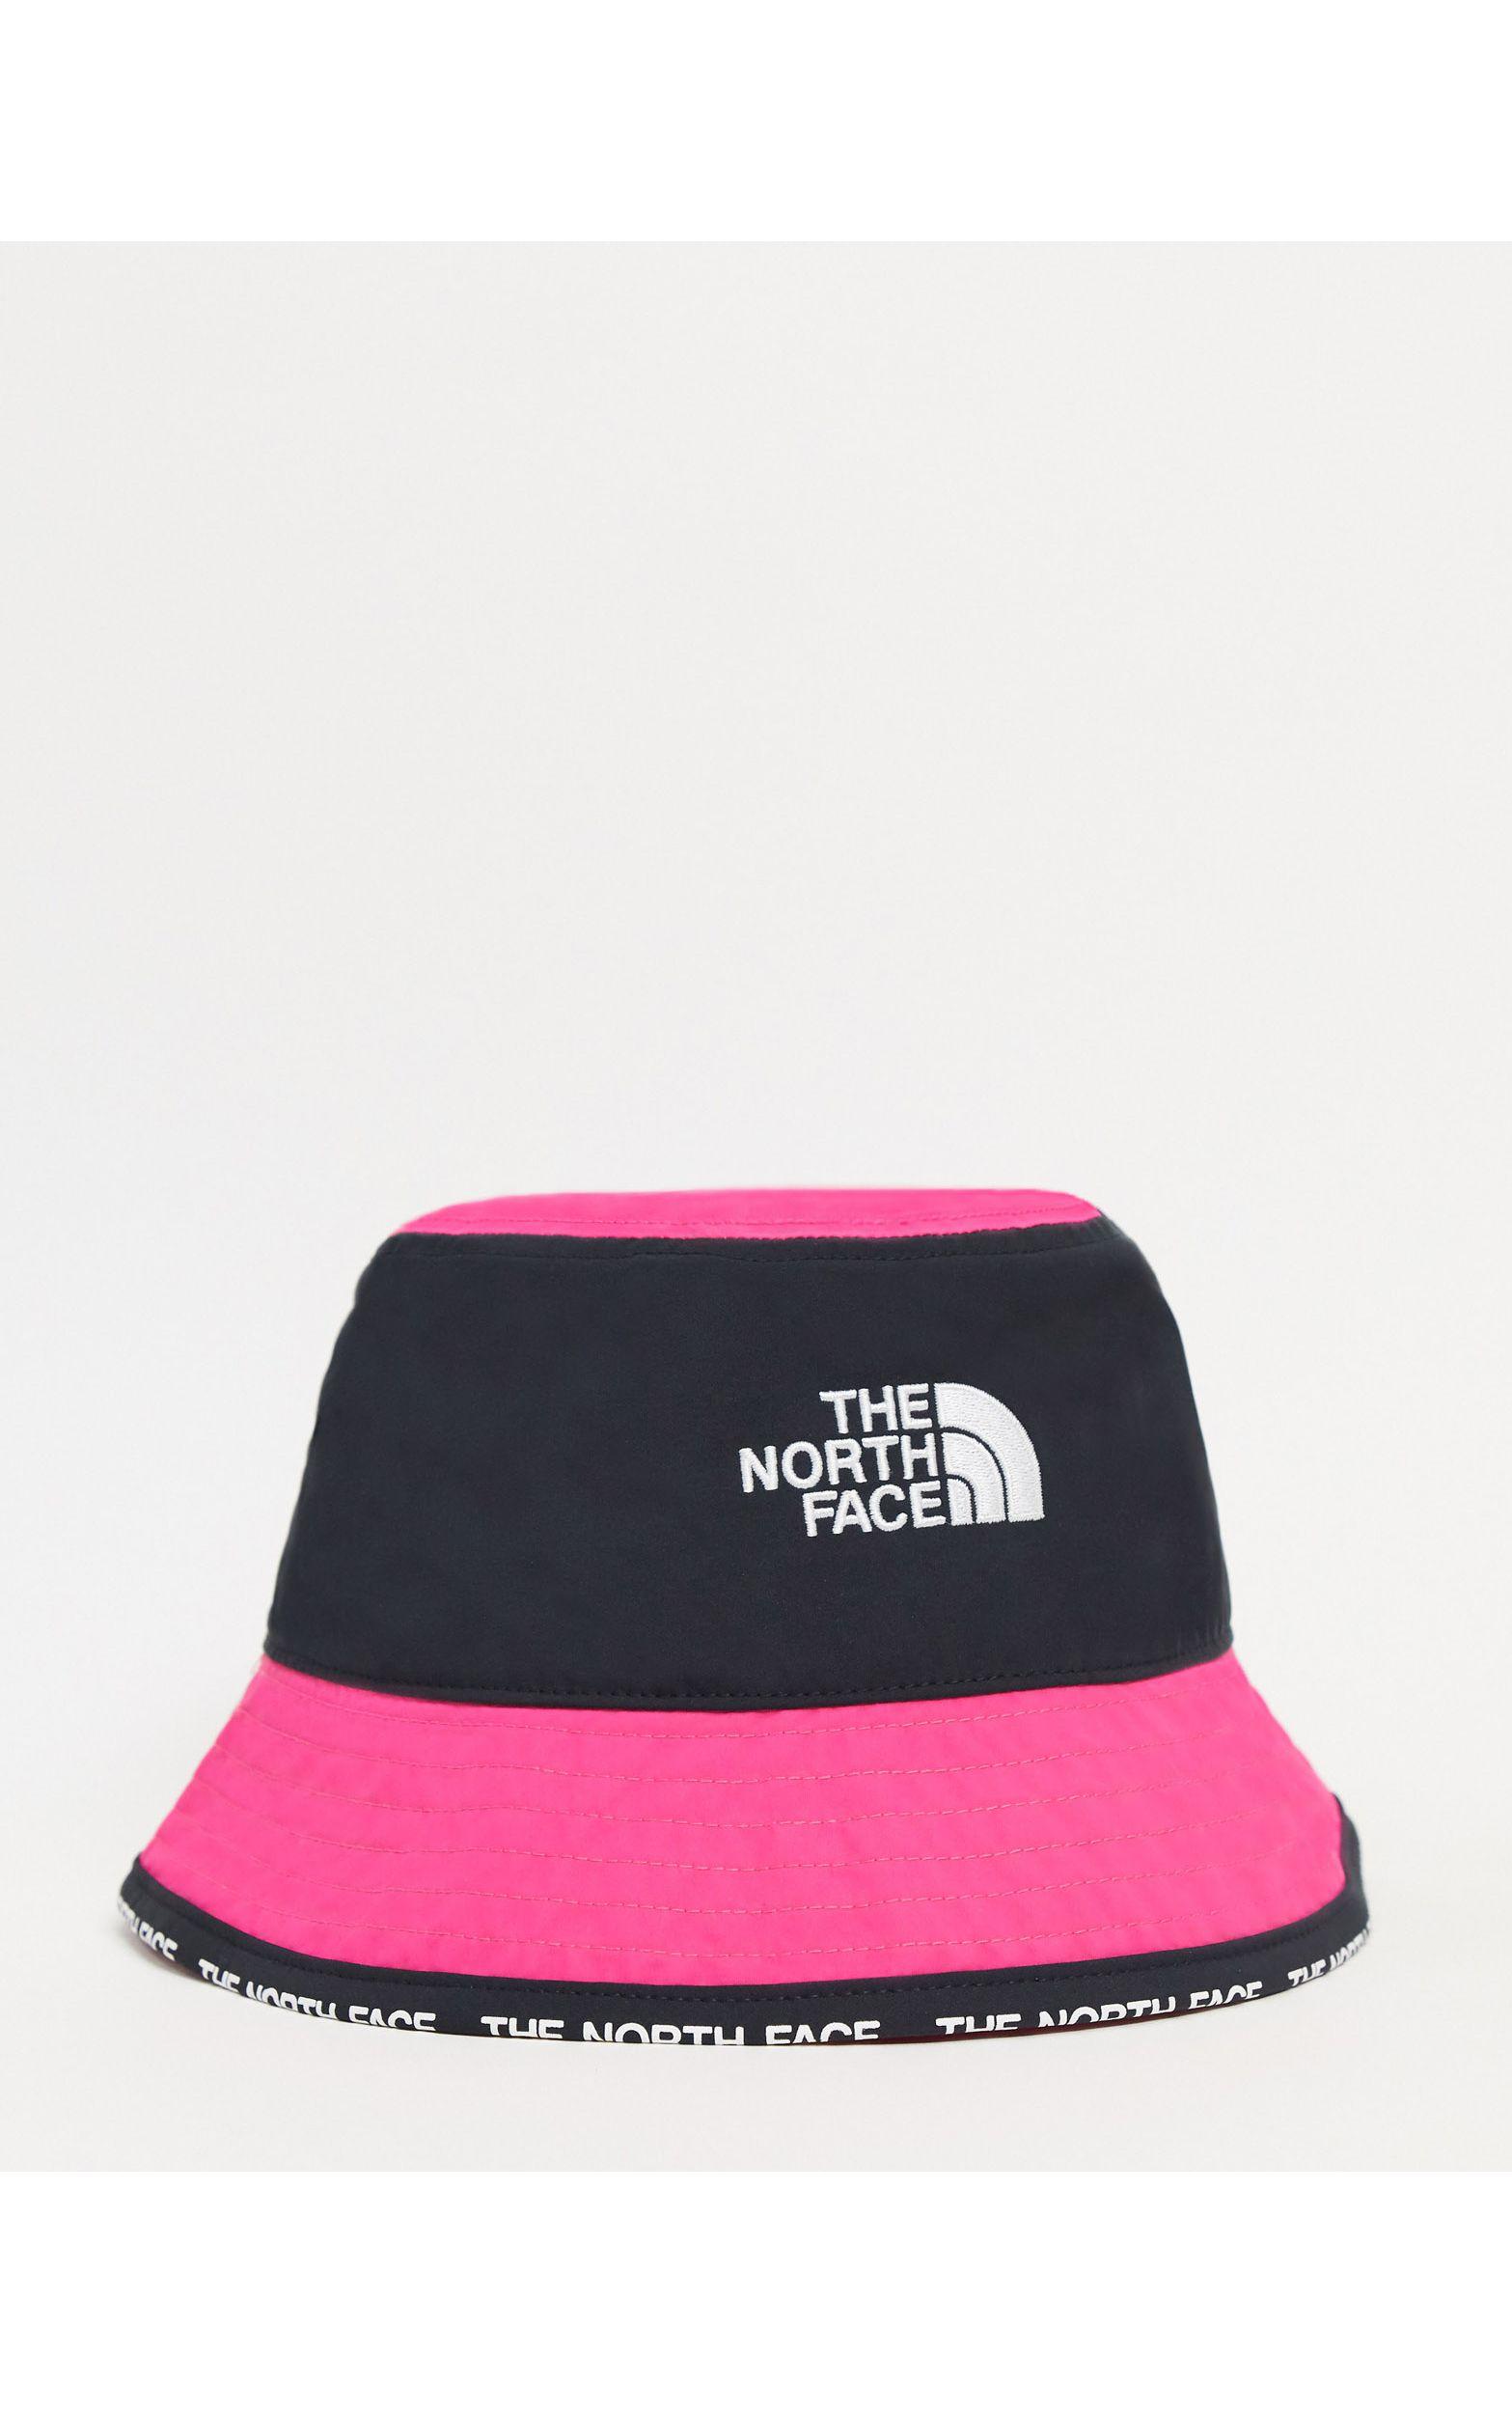 The North Face Cypress Bucket Hat in Pink for Men - Lyst